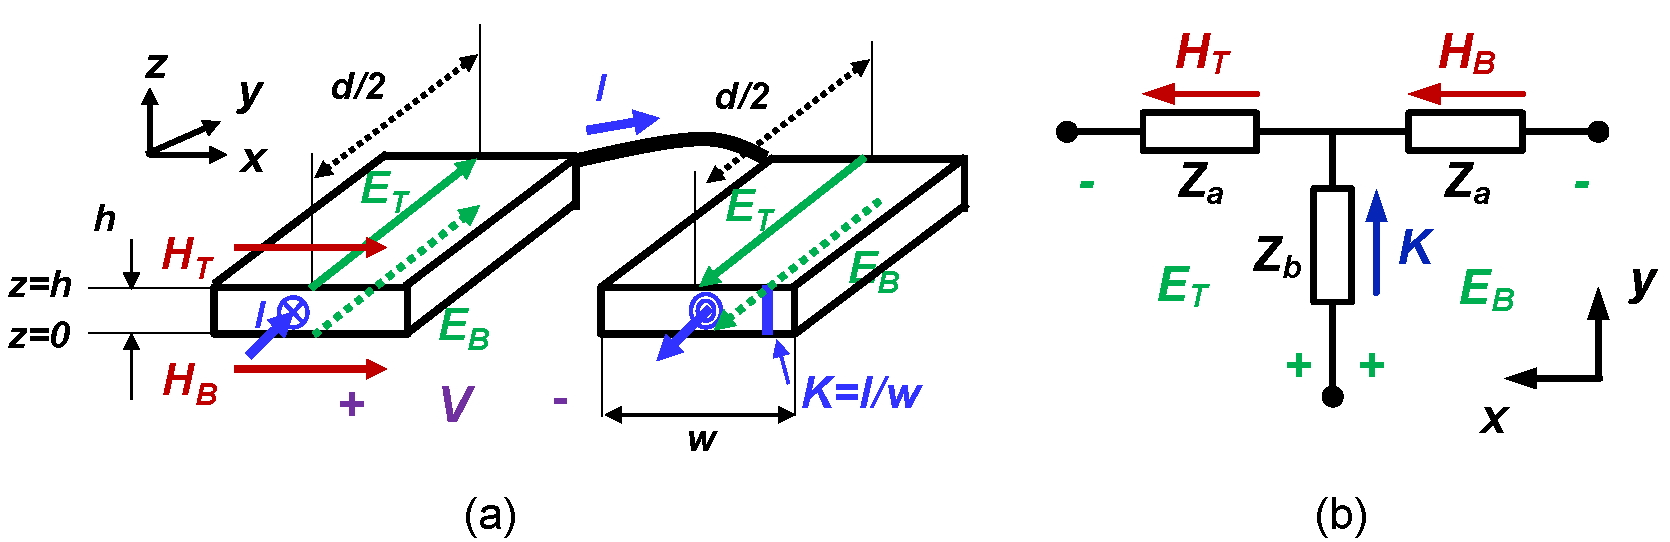 Fig. 1: Lumped circuit model of a single layer.